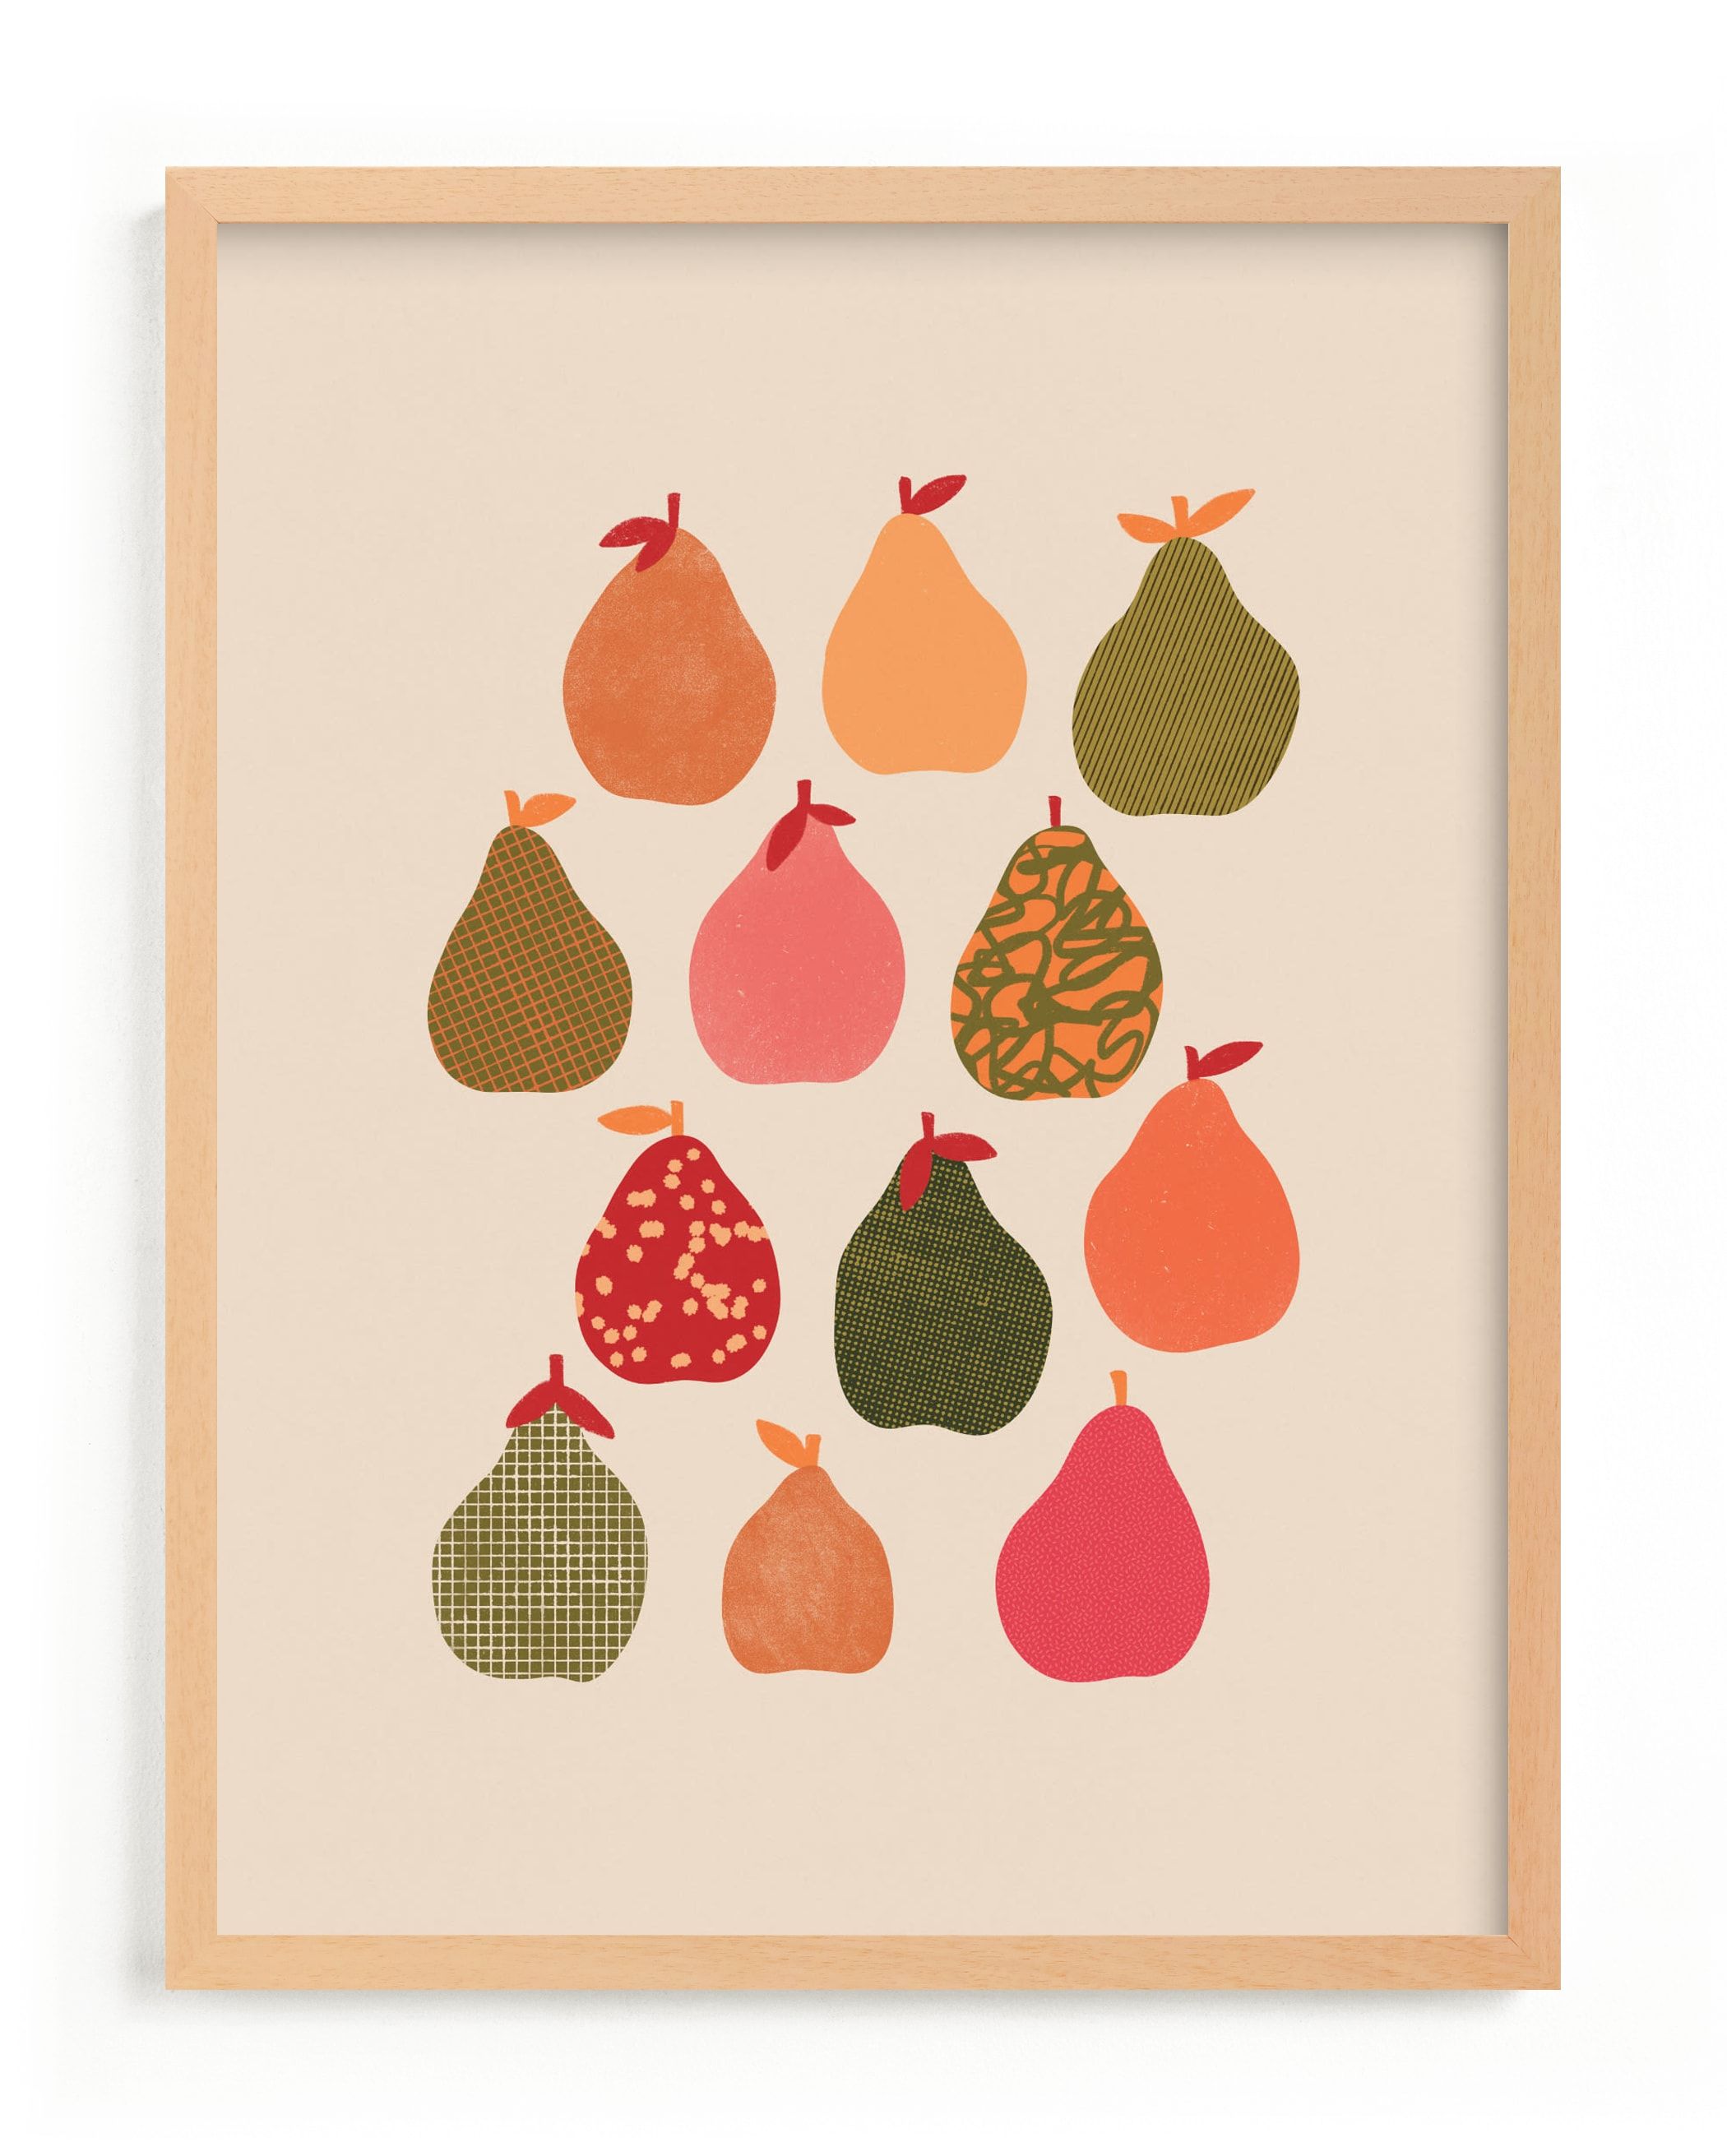 "Pears" - Graphic Limited Edition Art Print by Alisa Galitsyna. | Minted